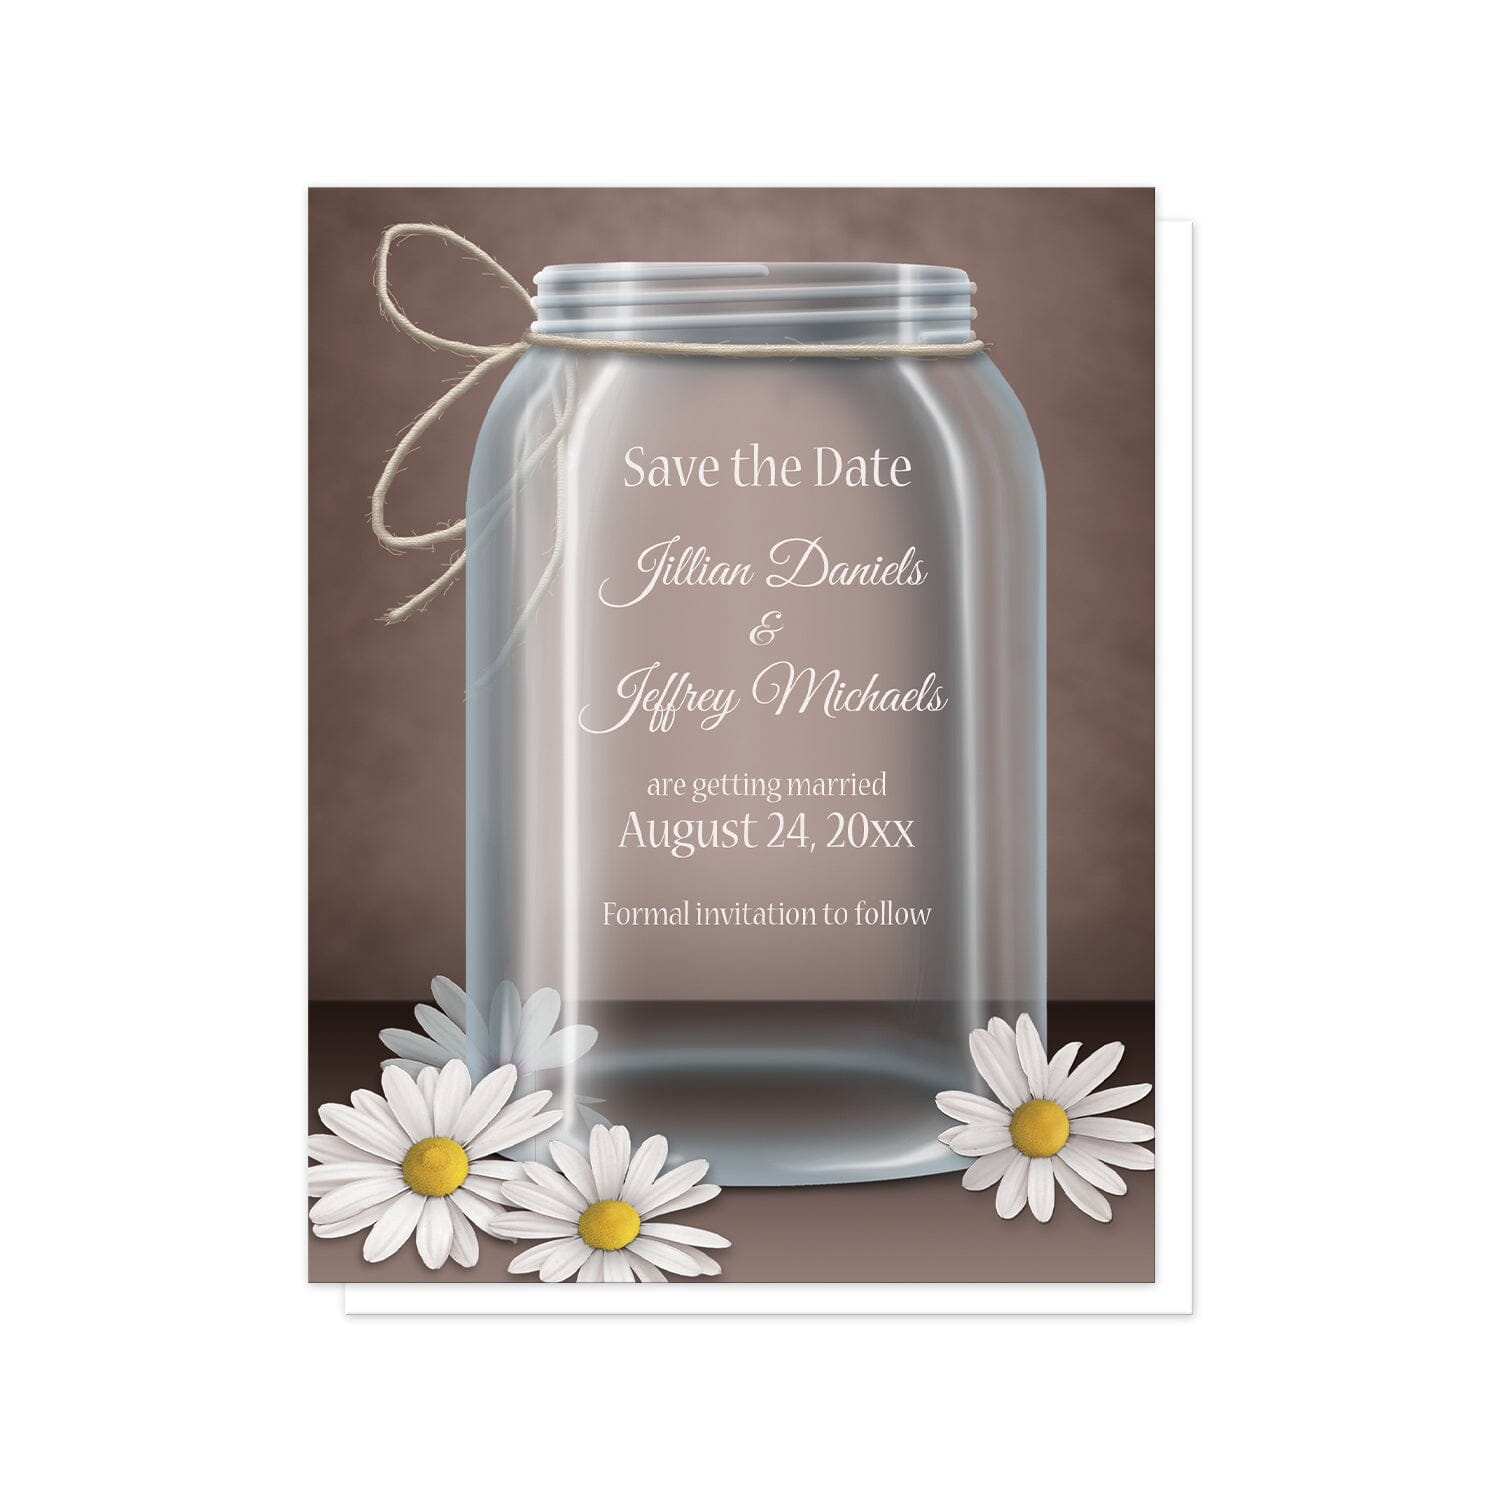 Vintage Rustic Mason Jar Daisy Save the Date Cards at Artistically Invited. Beautiful vintage rustic mason jar daisy save the date cards with an illustration of a glass mason jar with twine tied around the neck of it, white and yellow daisies laying at the foot of the jar, and a vintage brown background. Your personalized wedding date details are custom printed in white over the mason jar area of the design.